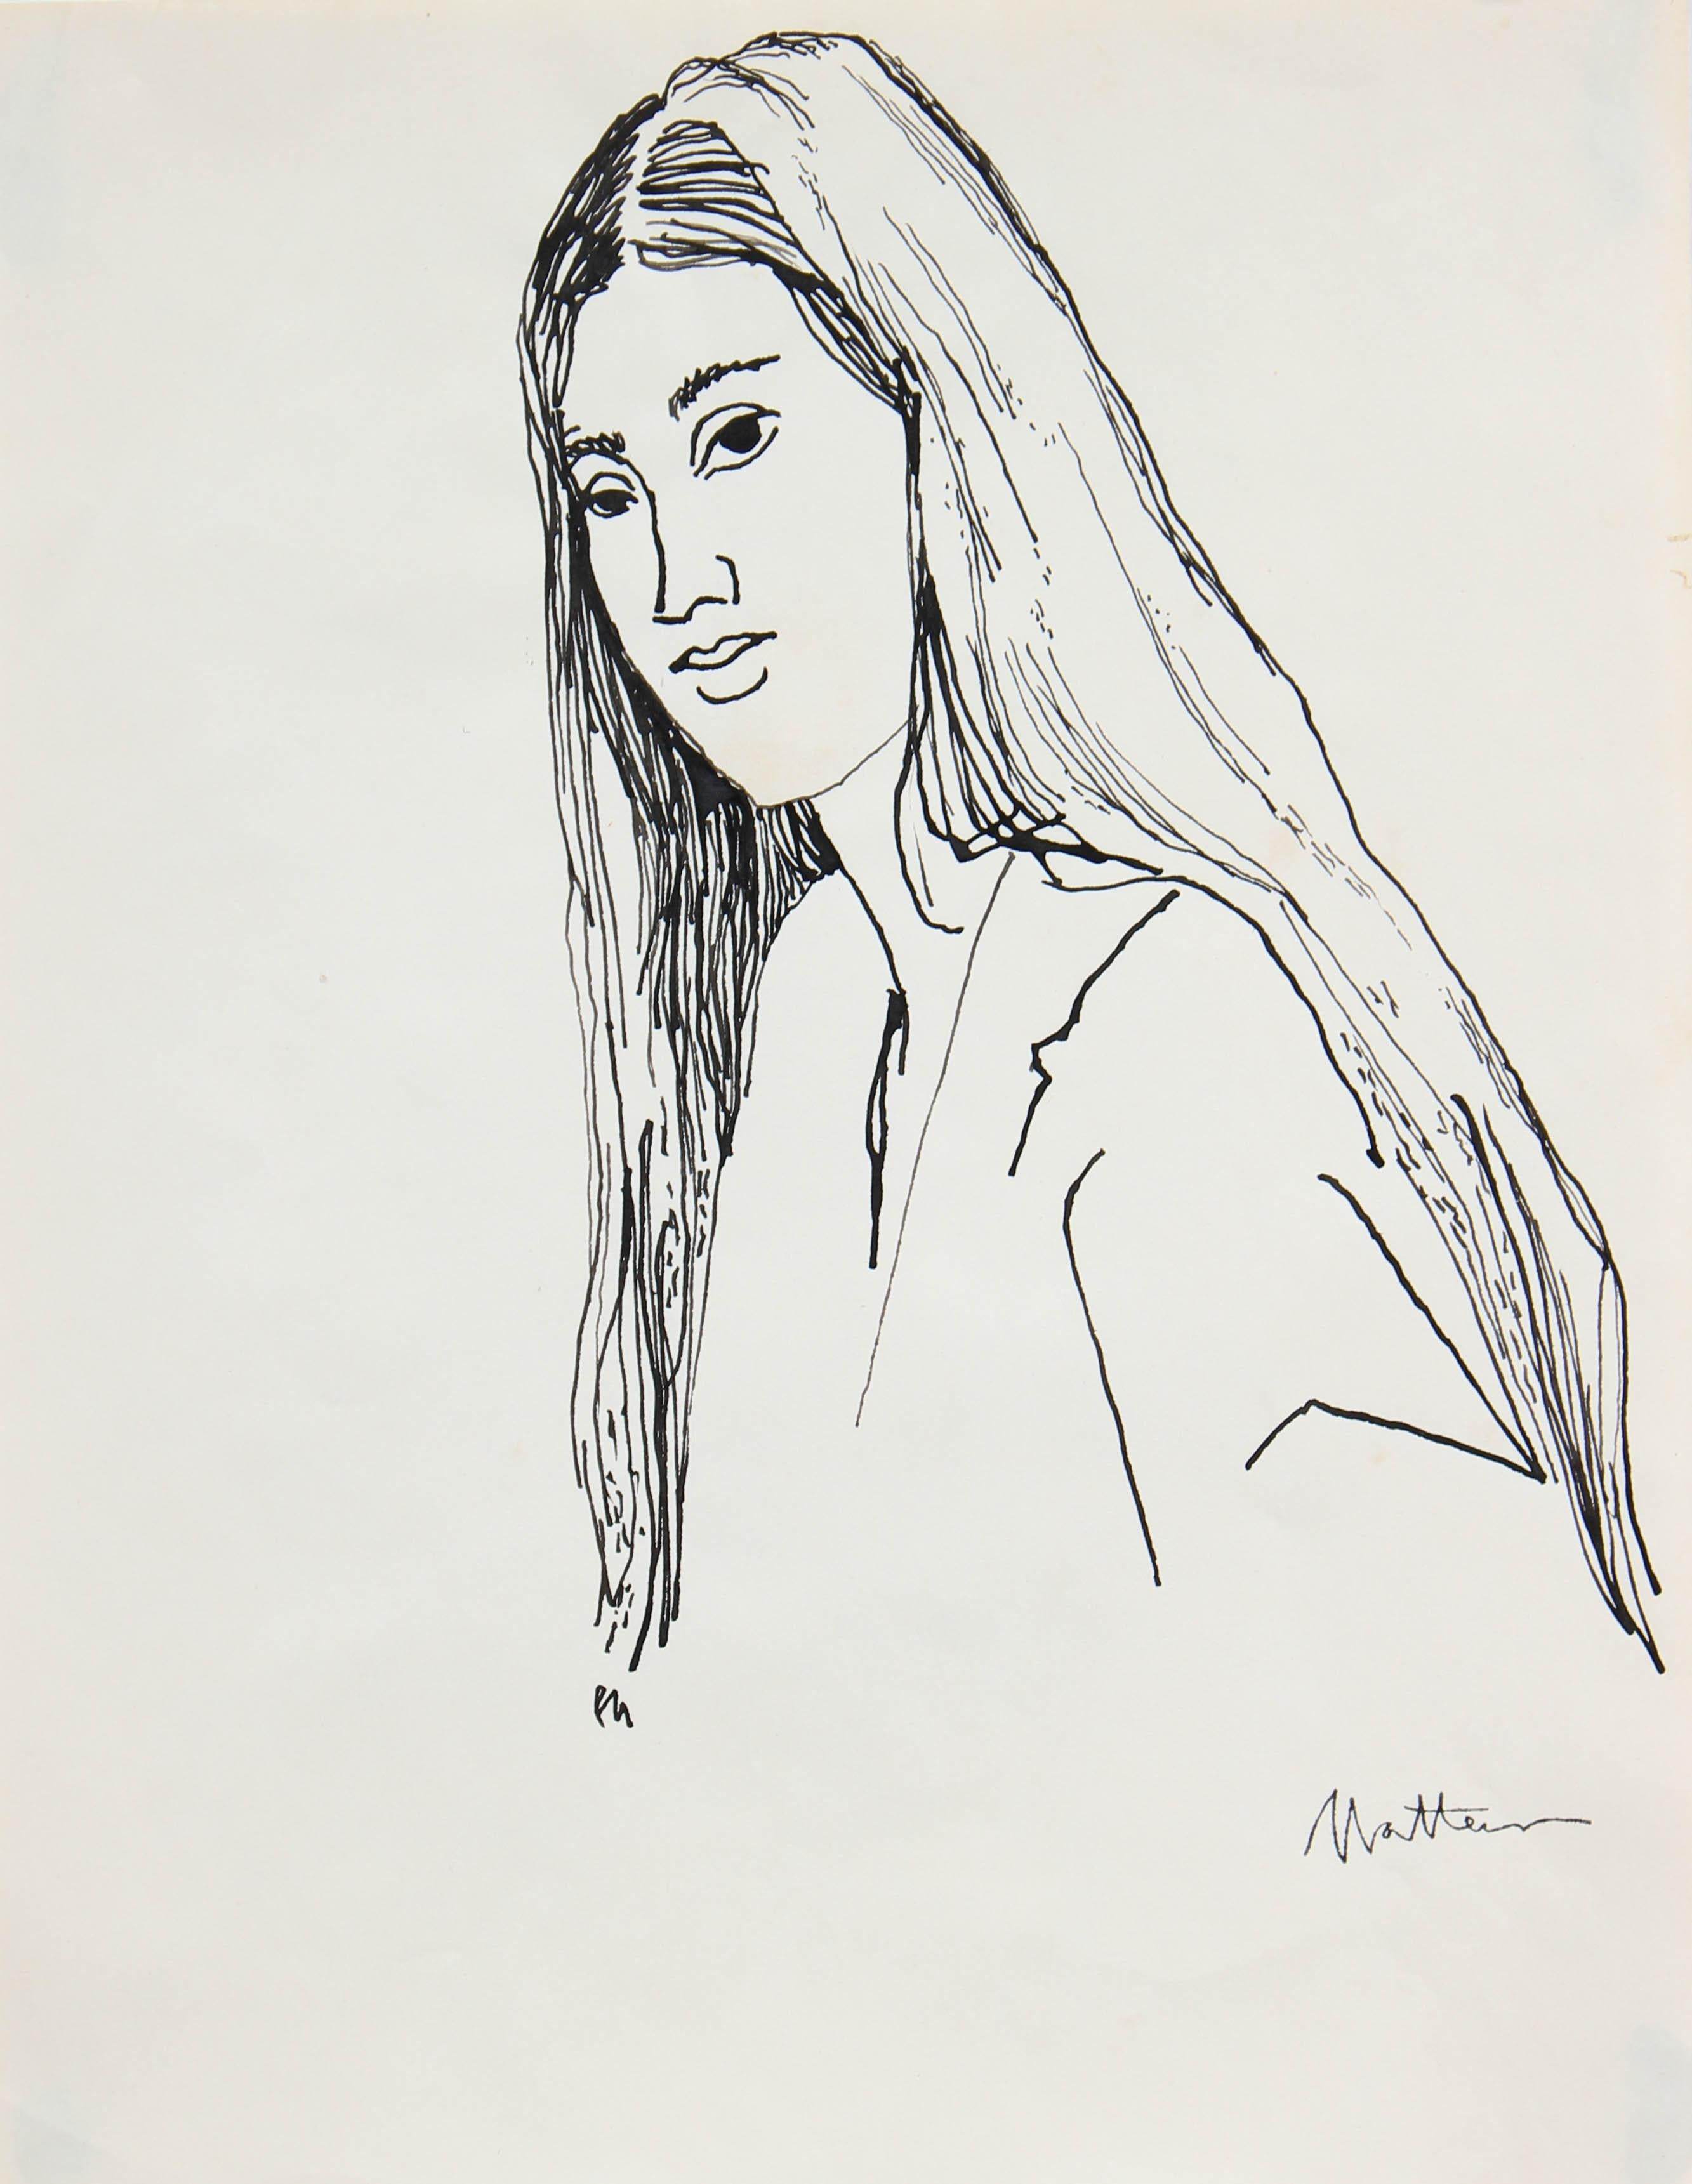 Portrait of a Woman with Long Hair, Ink on Paper, 20th Century